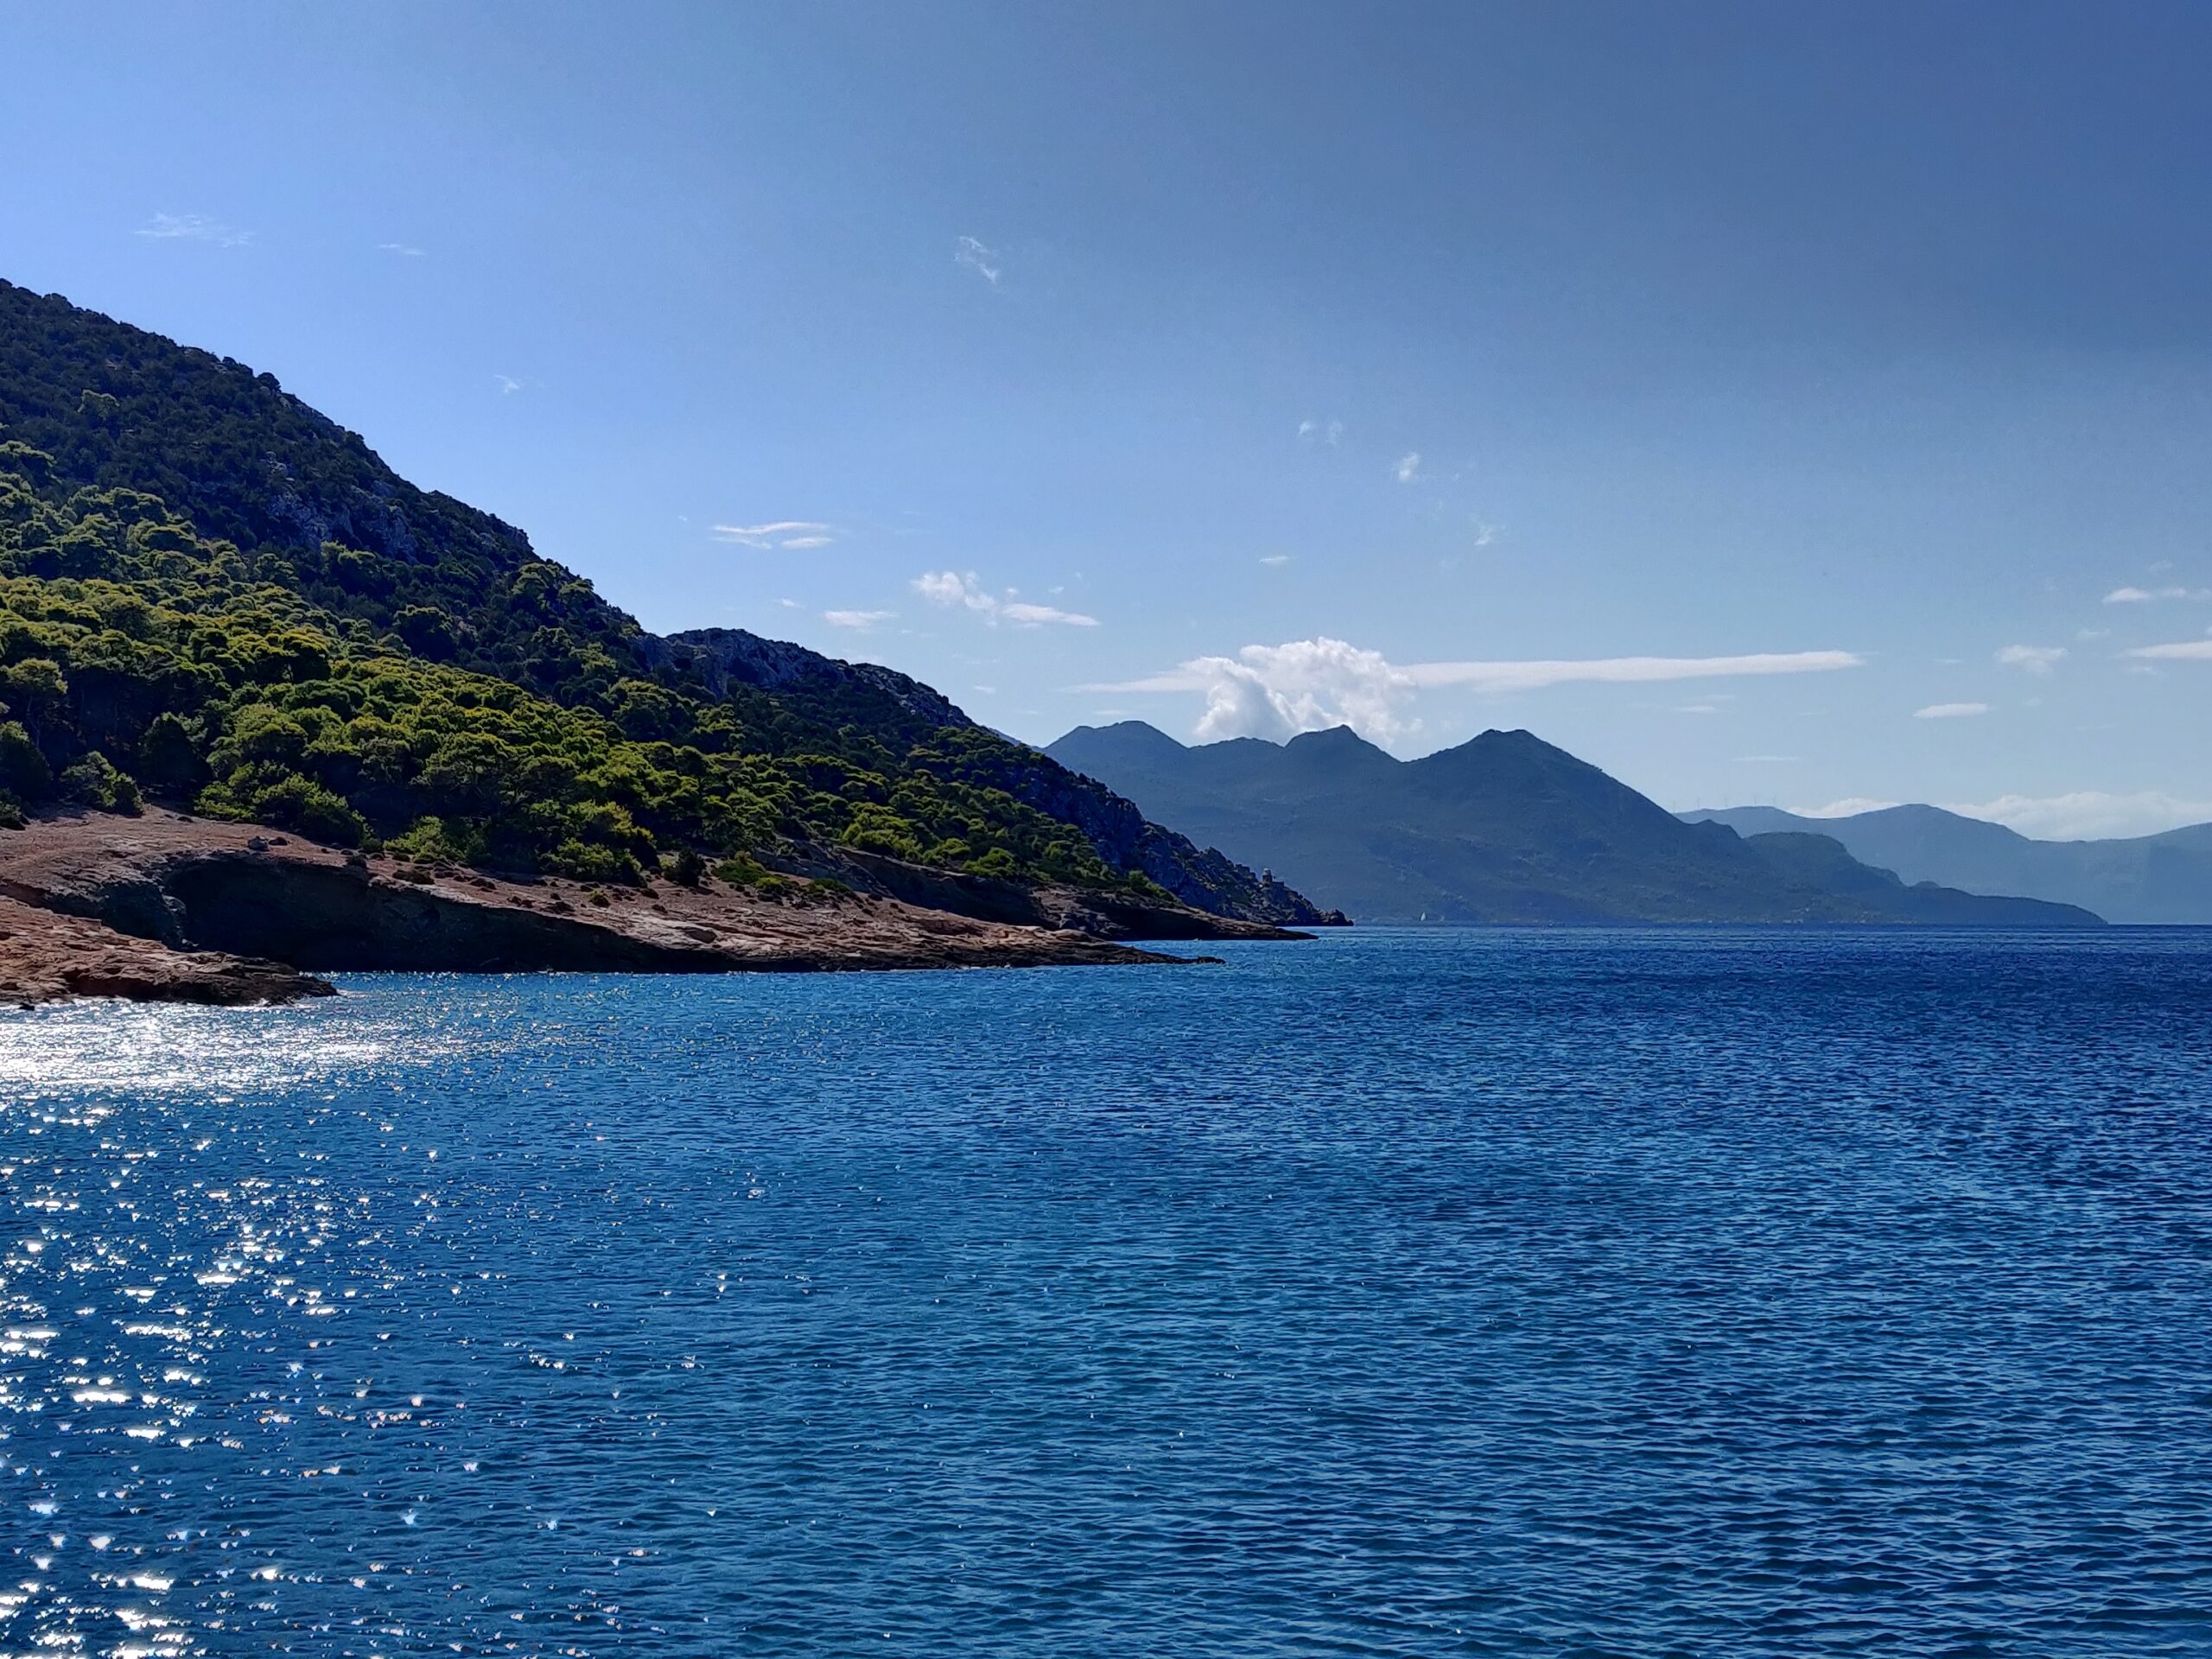 Agistri, Greece is visited during the Medsailors Saronic Voyager route. Image courtesy of Mauricio Munoz via Unsplash.